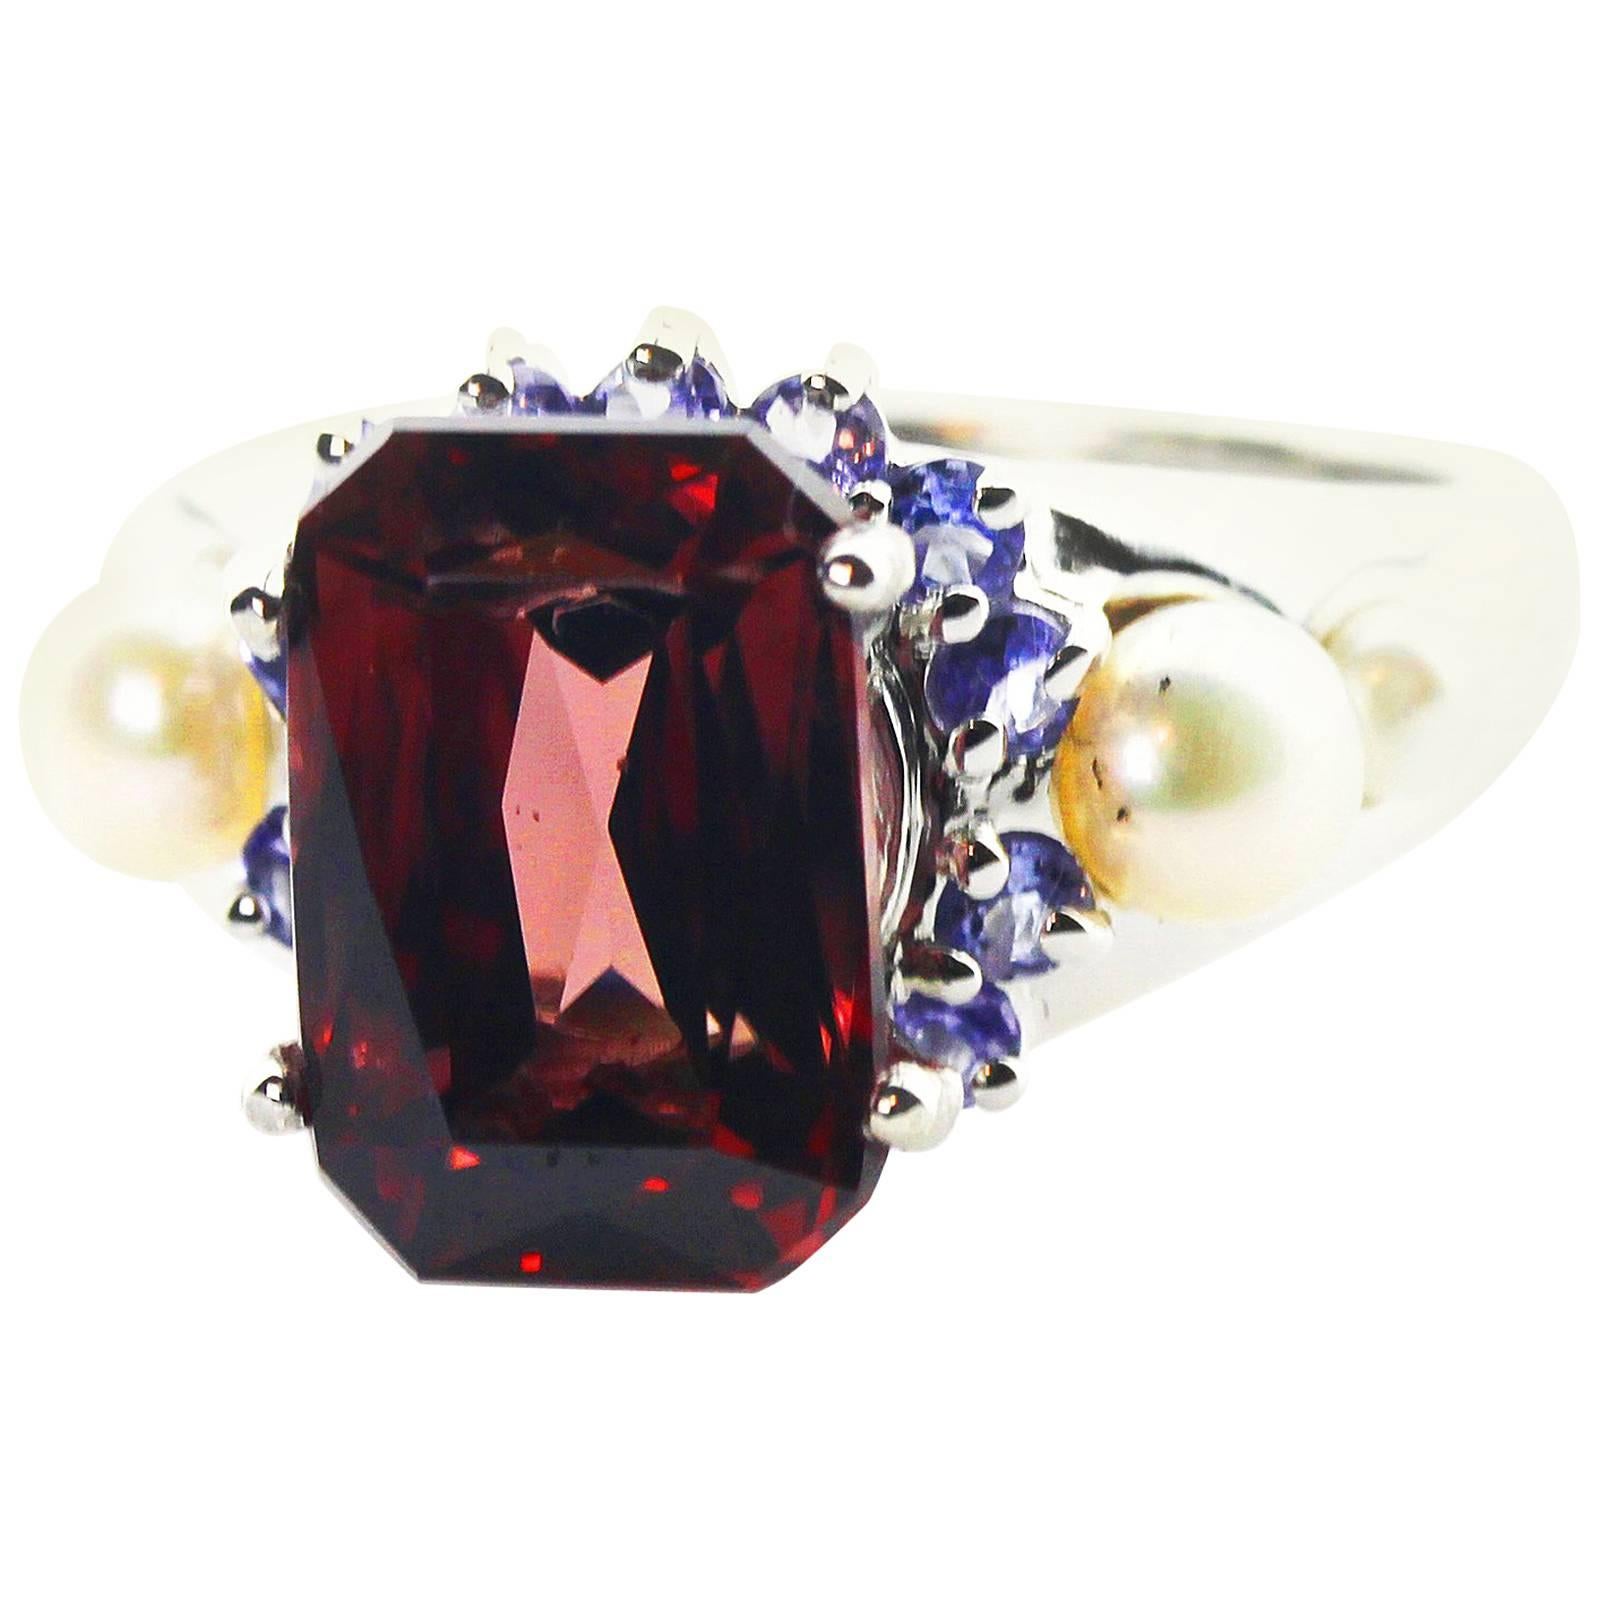 This 7.2 Carat glittering natural red Zircon measures 12 mm x 8 mm and is set in a Sterling Silver ring enhanced with blue Sapphires and white Pearls. The ring is size 7 (sizable).   There are no eye visible inclusions in this magnificent rare